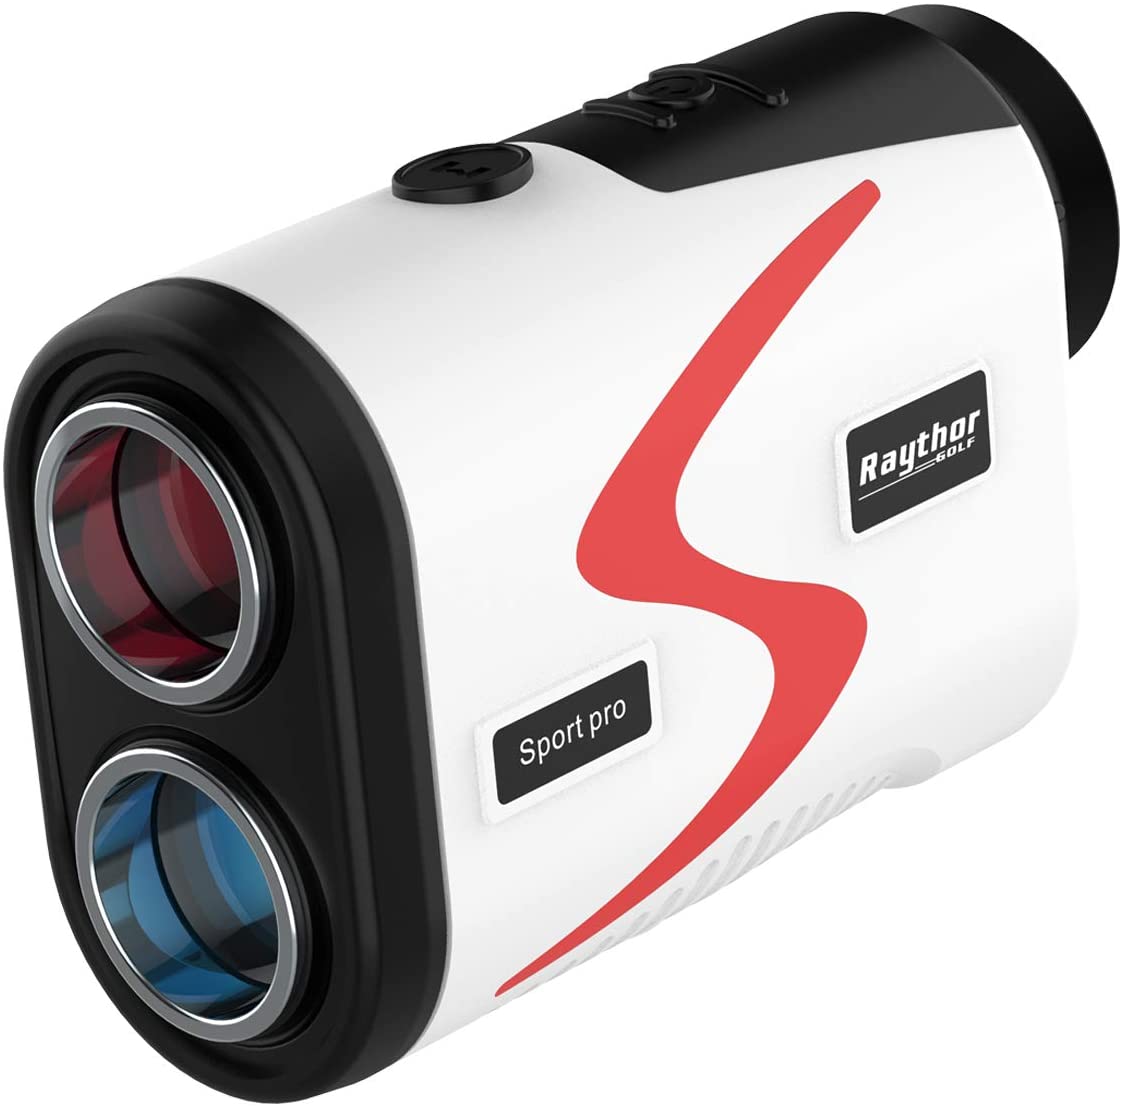 Top 10 Best Budget Golf Rangefinders With Slope (2021 Reviews) - Brand